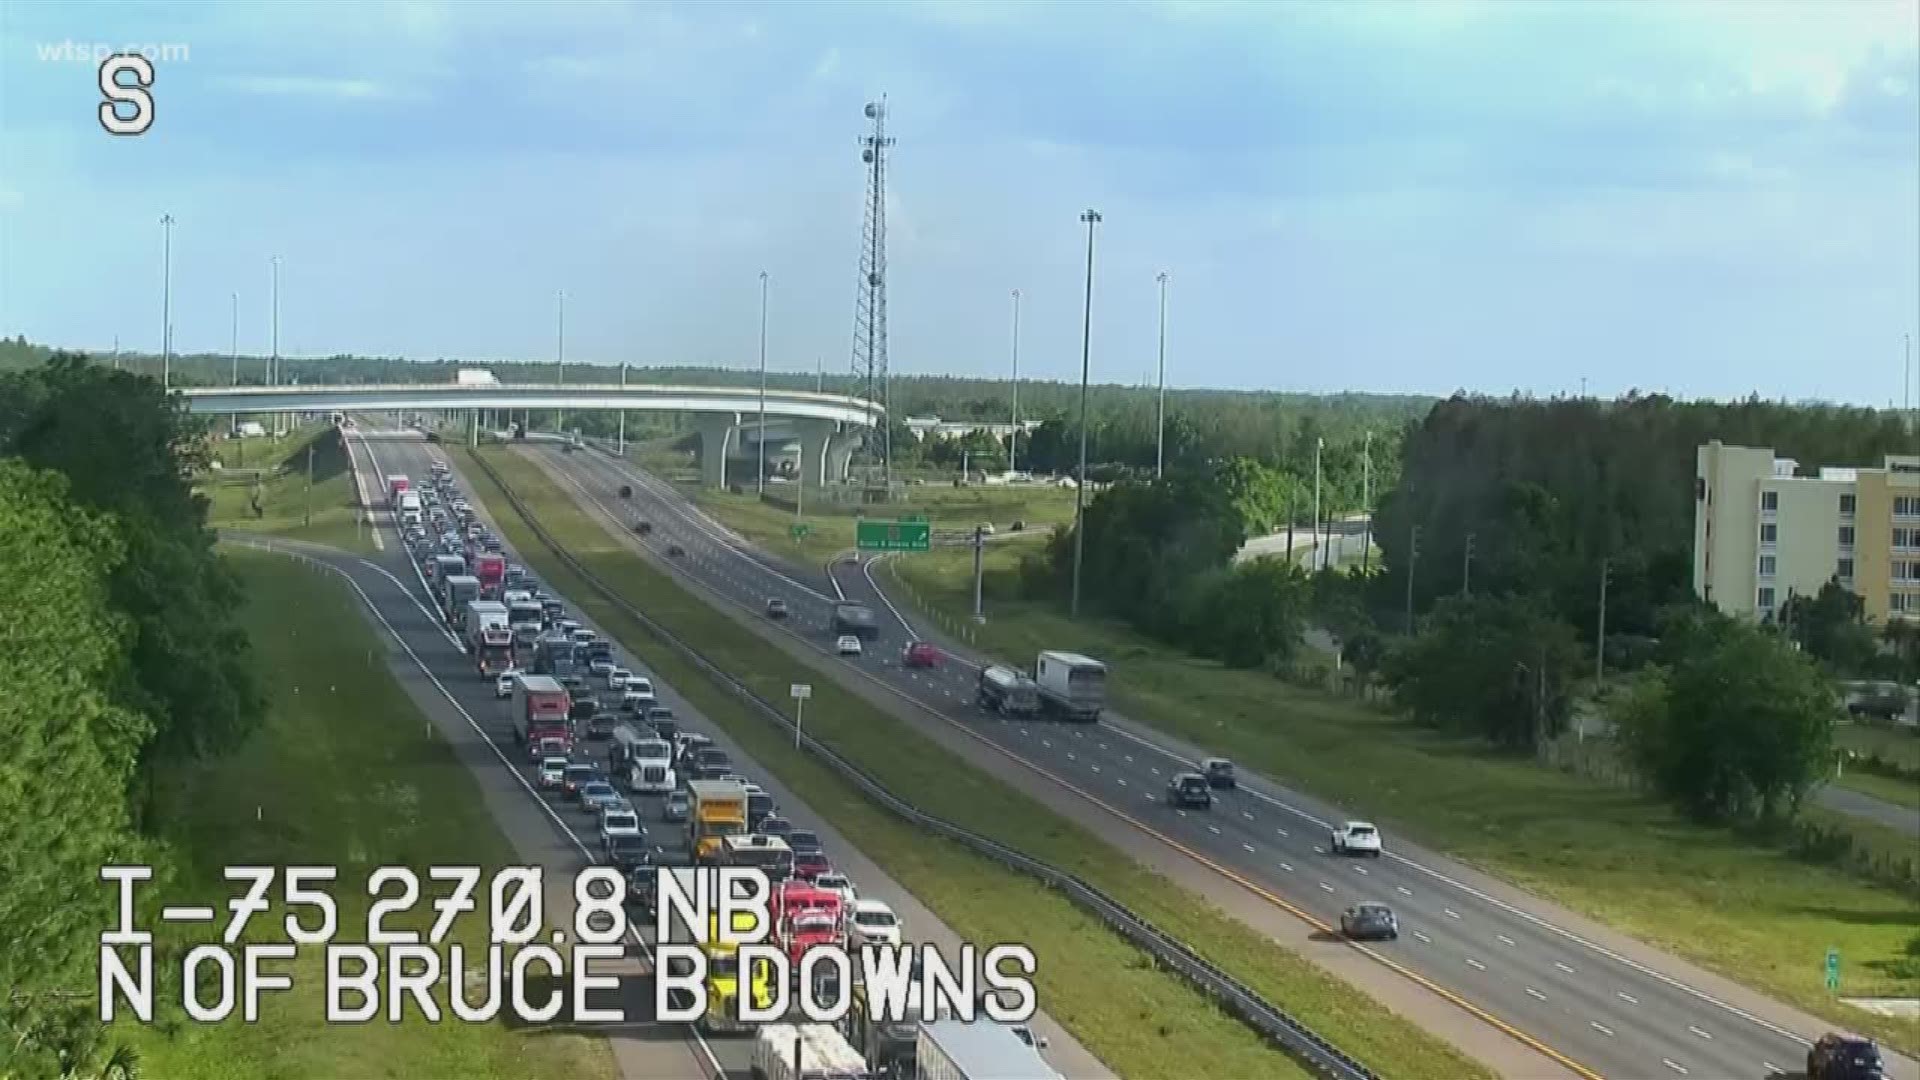 All lanes of Interstate 75 North are closed near the Bruce B. Downs exit after a crash.

Traffic is only getting by on the right shoulder.